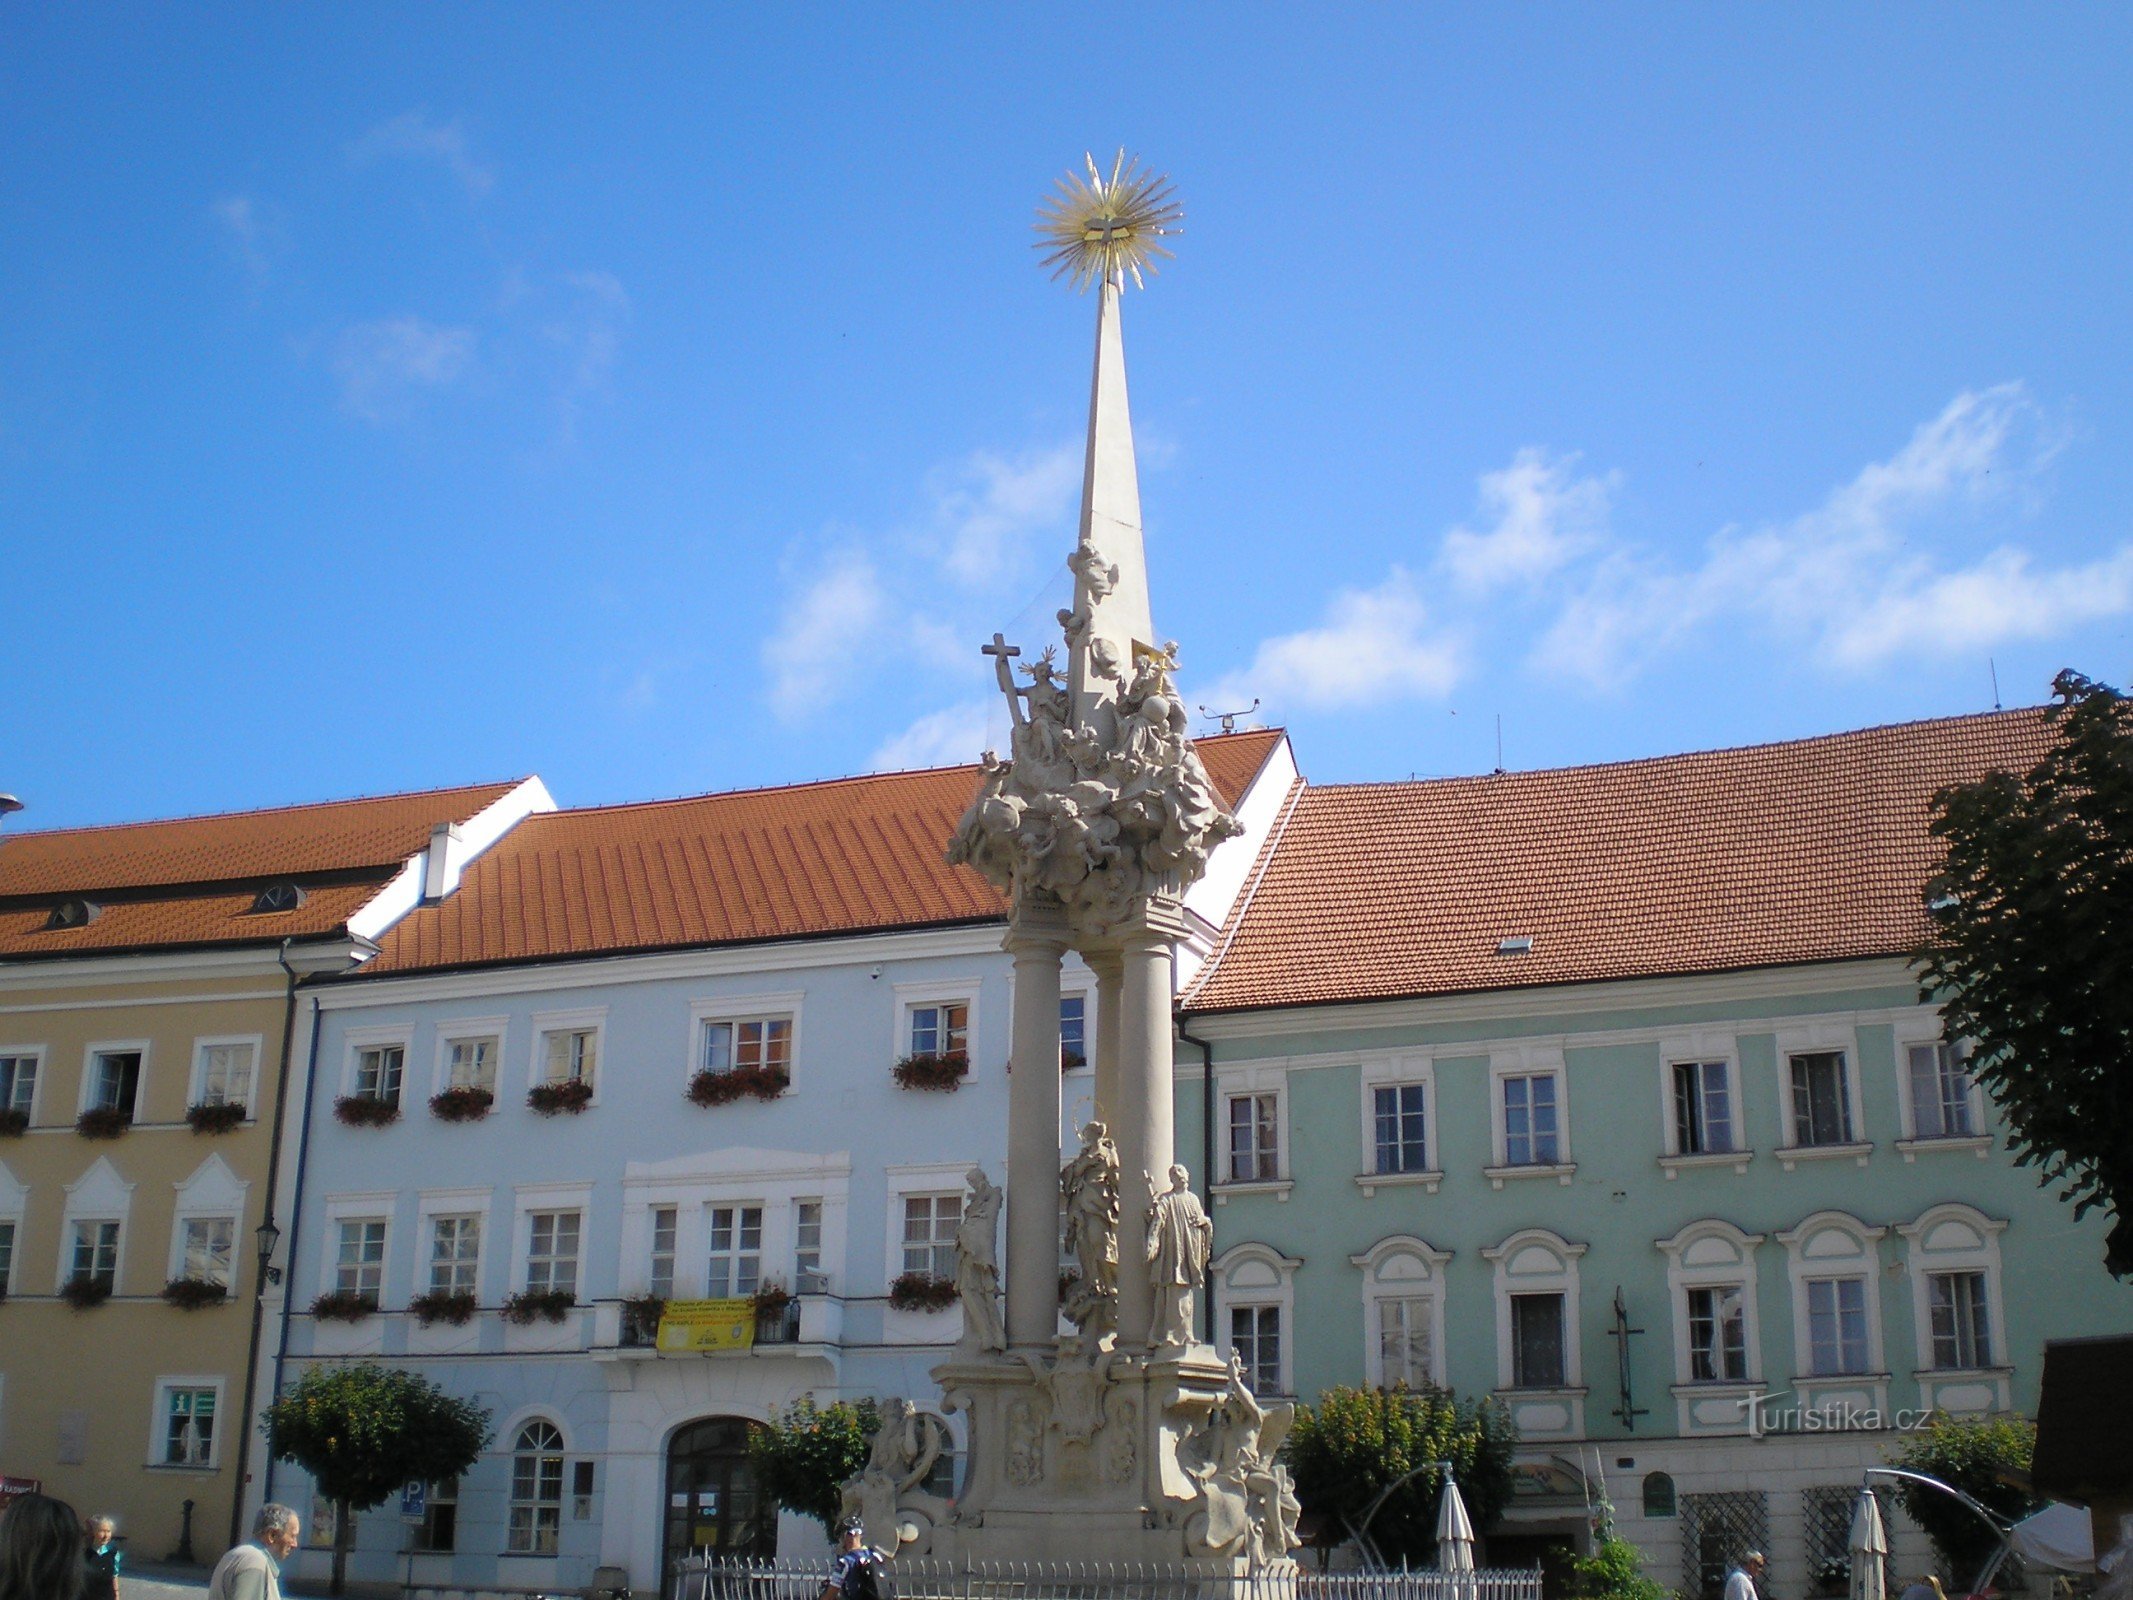 Baroque column on the square